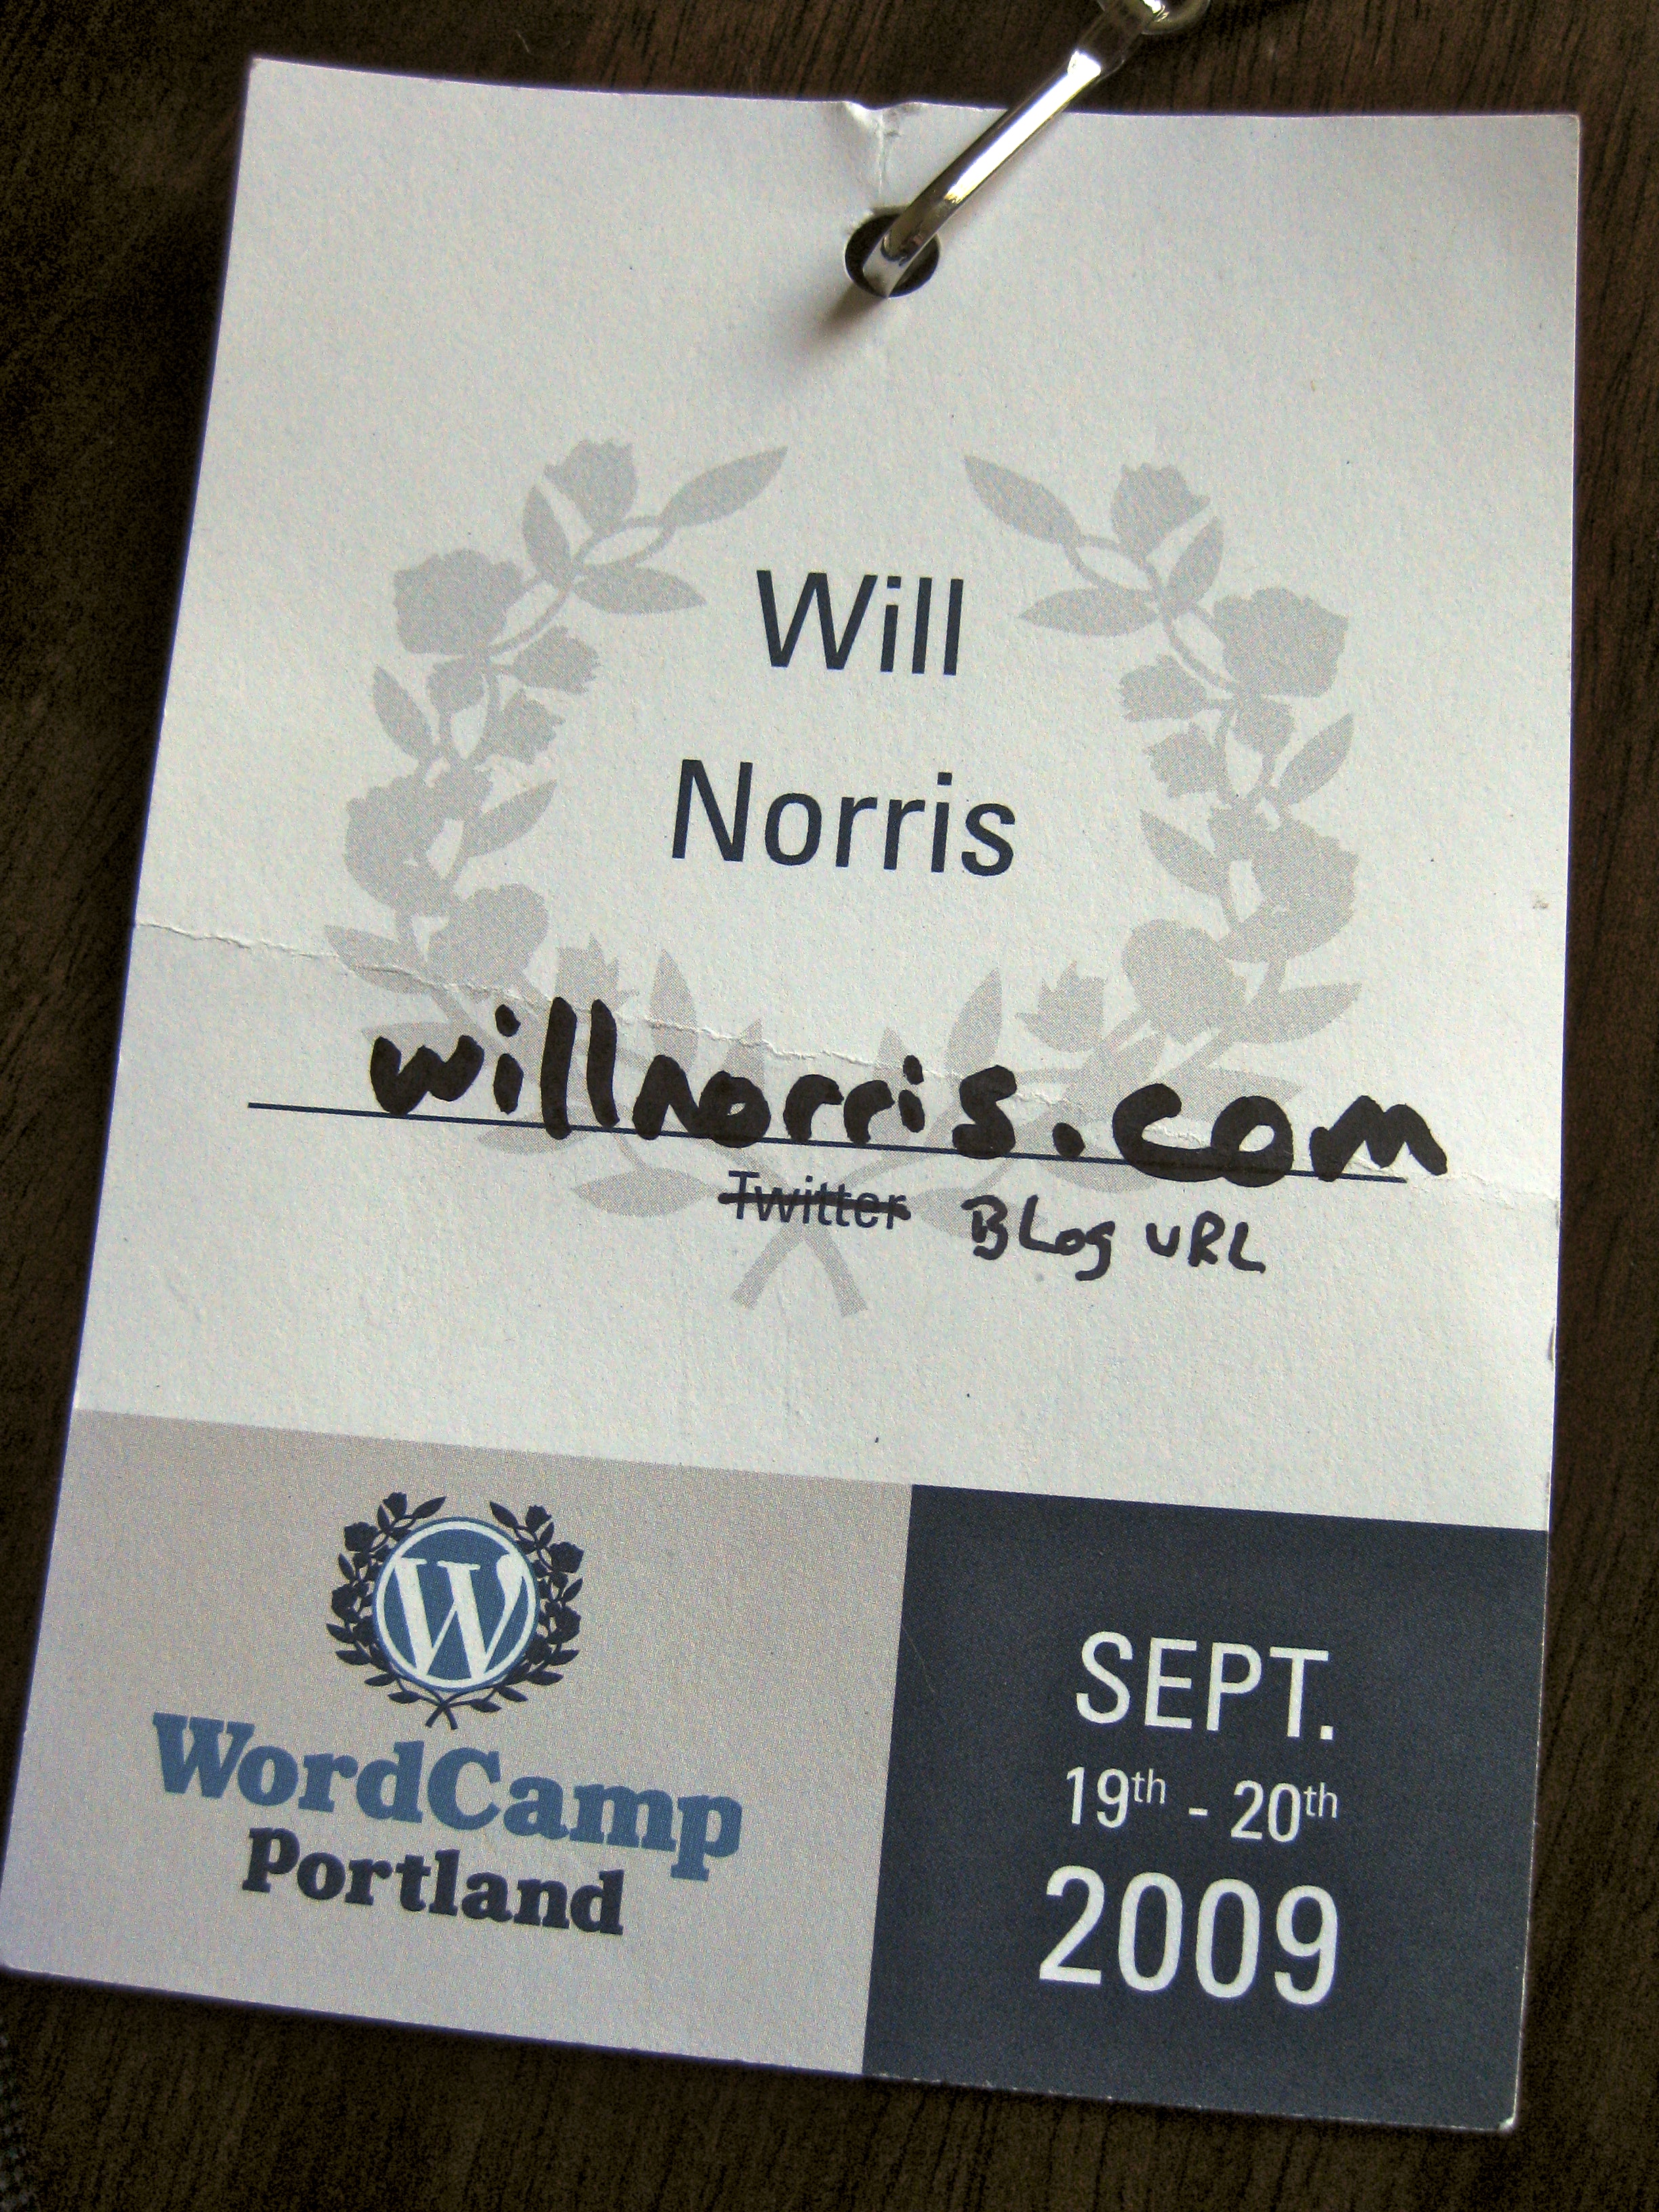 WordCamp Portland name badge with 'Twitter' label crossed out and replaced
  by handwritten label 'Blog URL'